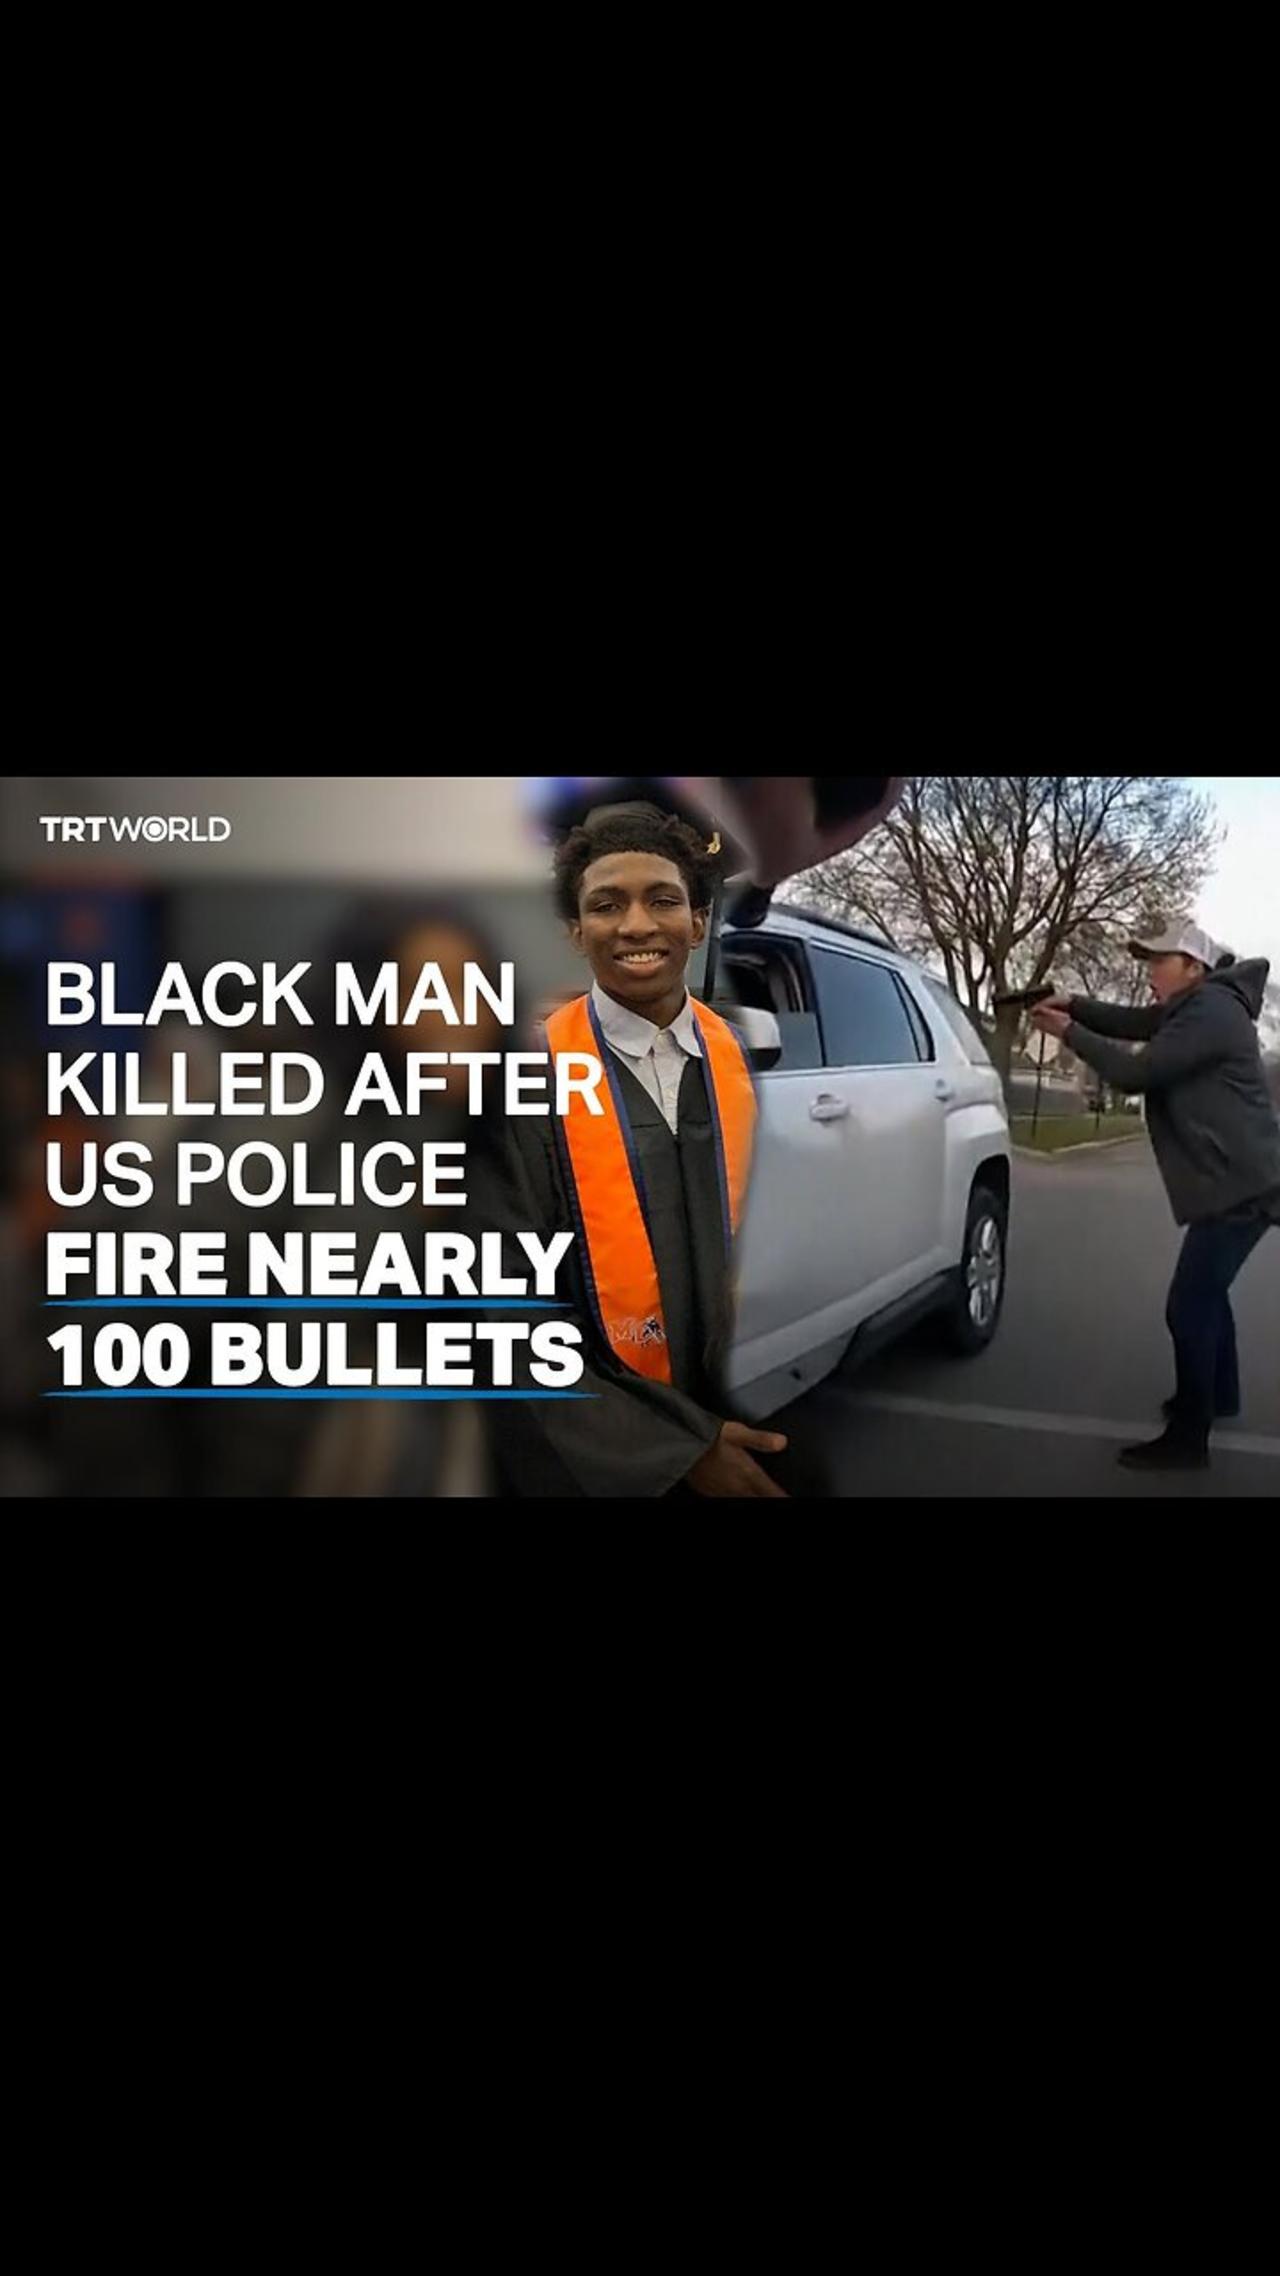 US police fire nearly 100 gunshots at Black driver